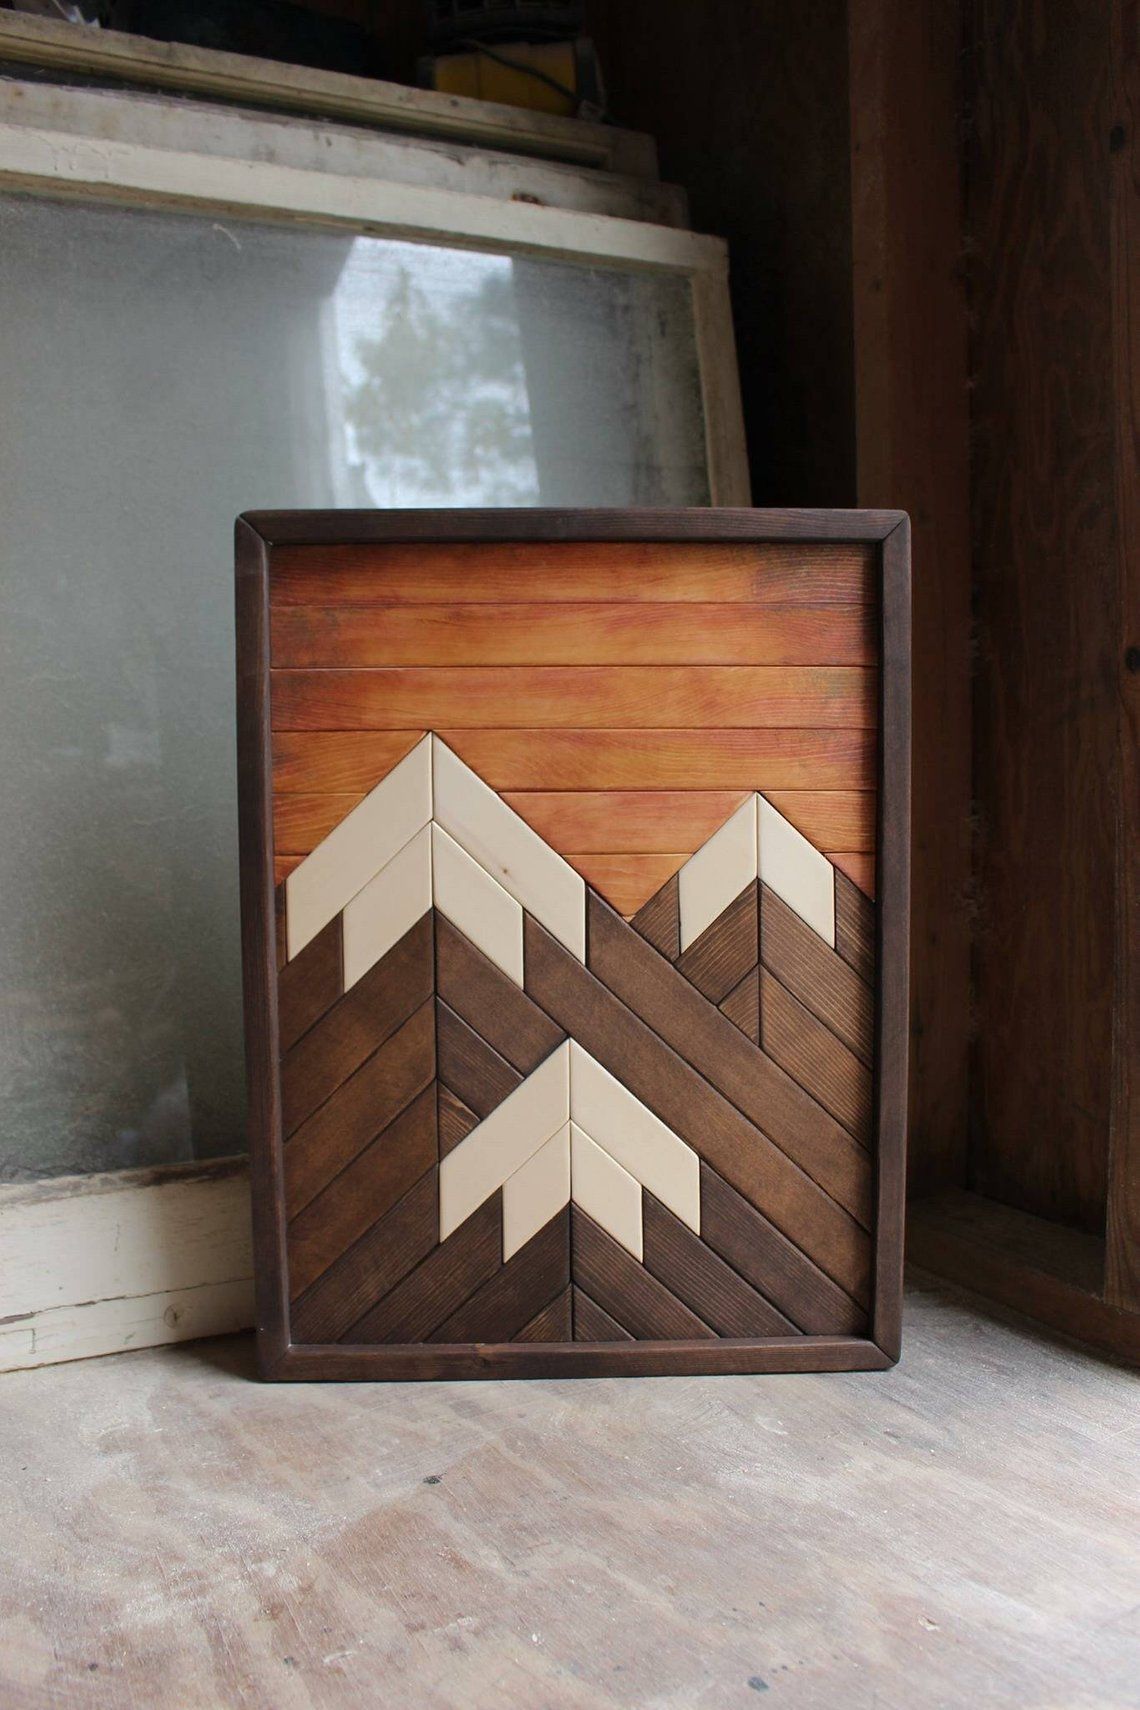 Image 0 | Mountain Wood Art, Wood Wall Art, Wood Art With Regard To Most Popular Mountains Wood Wall Art (Gallery 20 of 20)